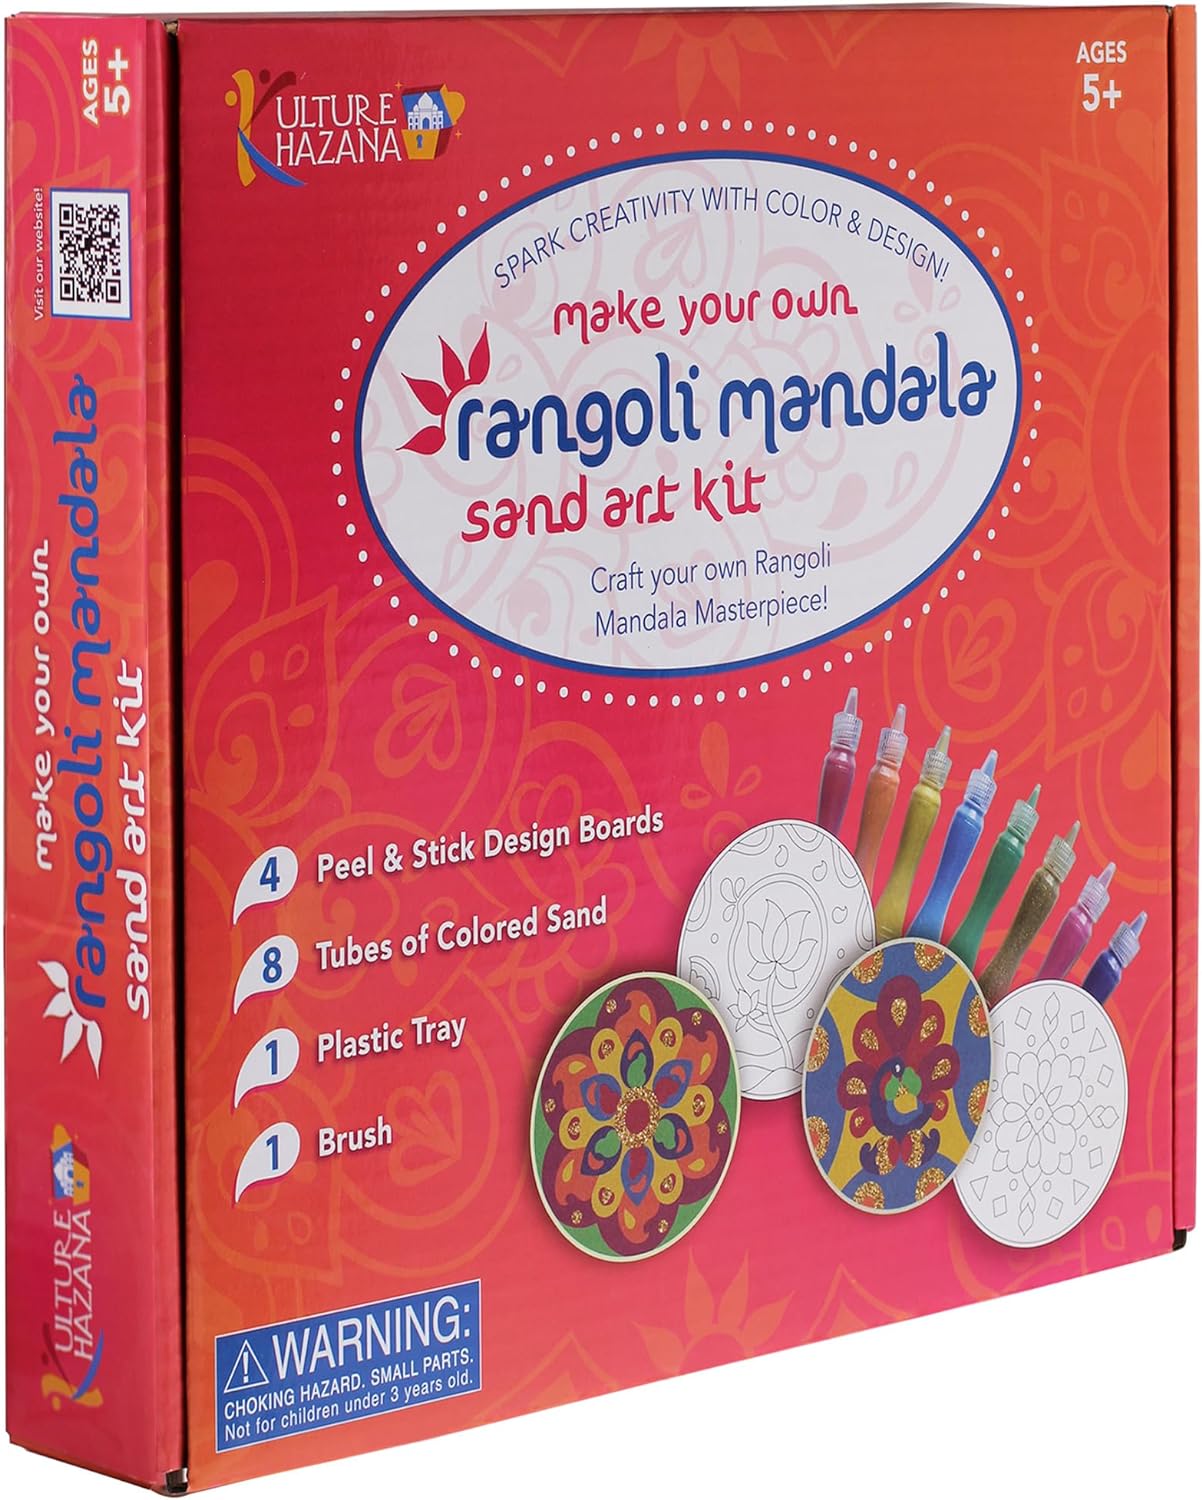 Make Your Own Rangoli Mandala Sand Art Ki - Mess-Free Craft, DIY Glitter Sand Art, India and South Asian Culture Activity for Kids Ages 5 and Up